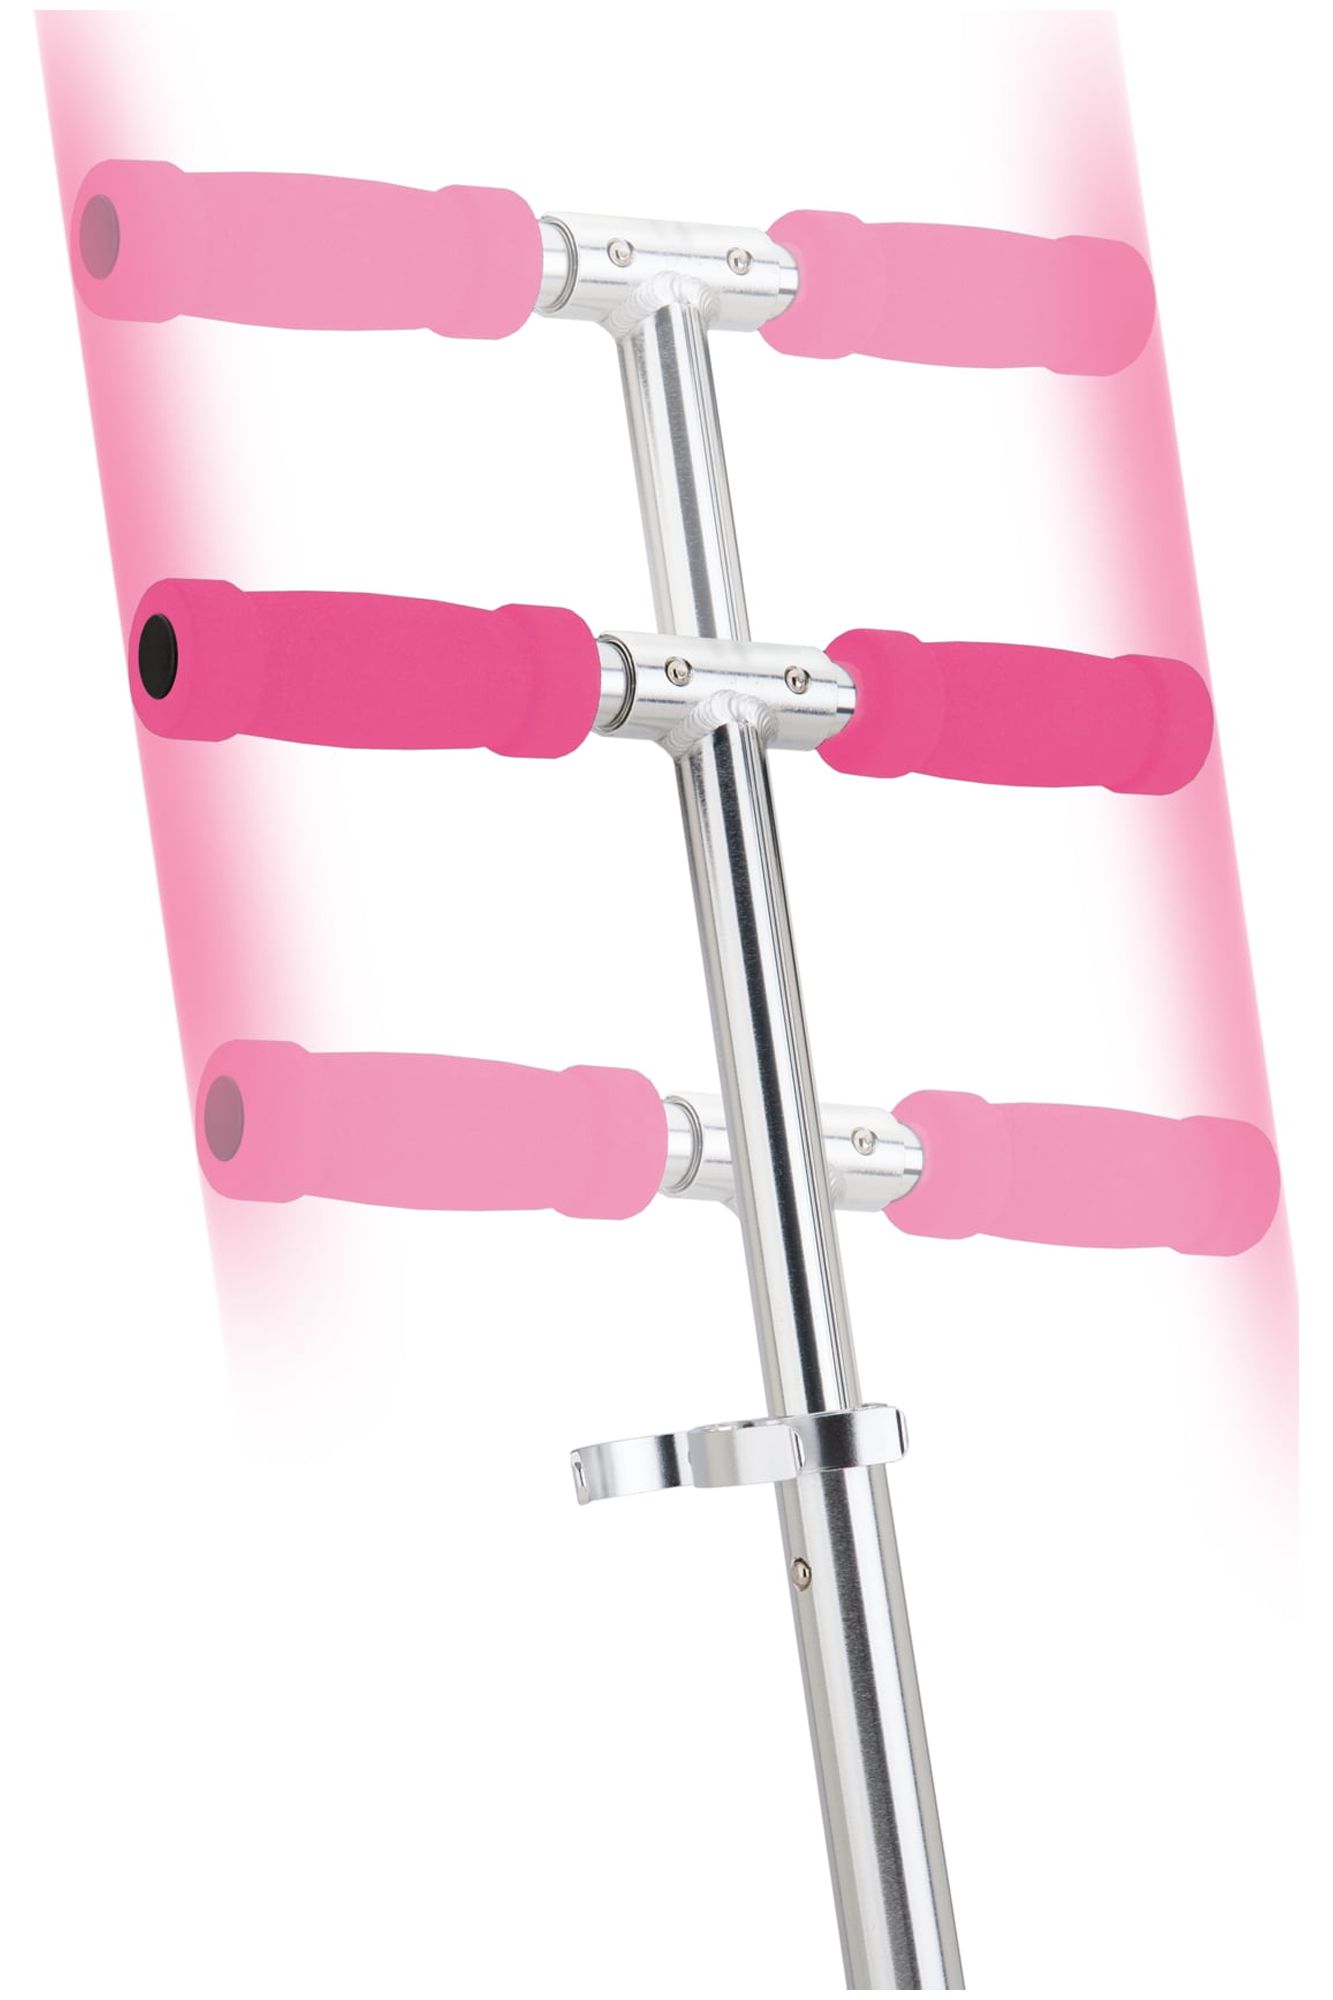 Razor A Kick Scooter for Kids - Pink, Lightweight, Foldable, Aluminum Frame, for Child Ages 5+ - image 4 of 9